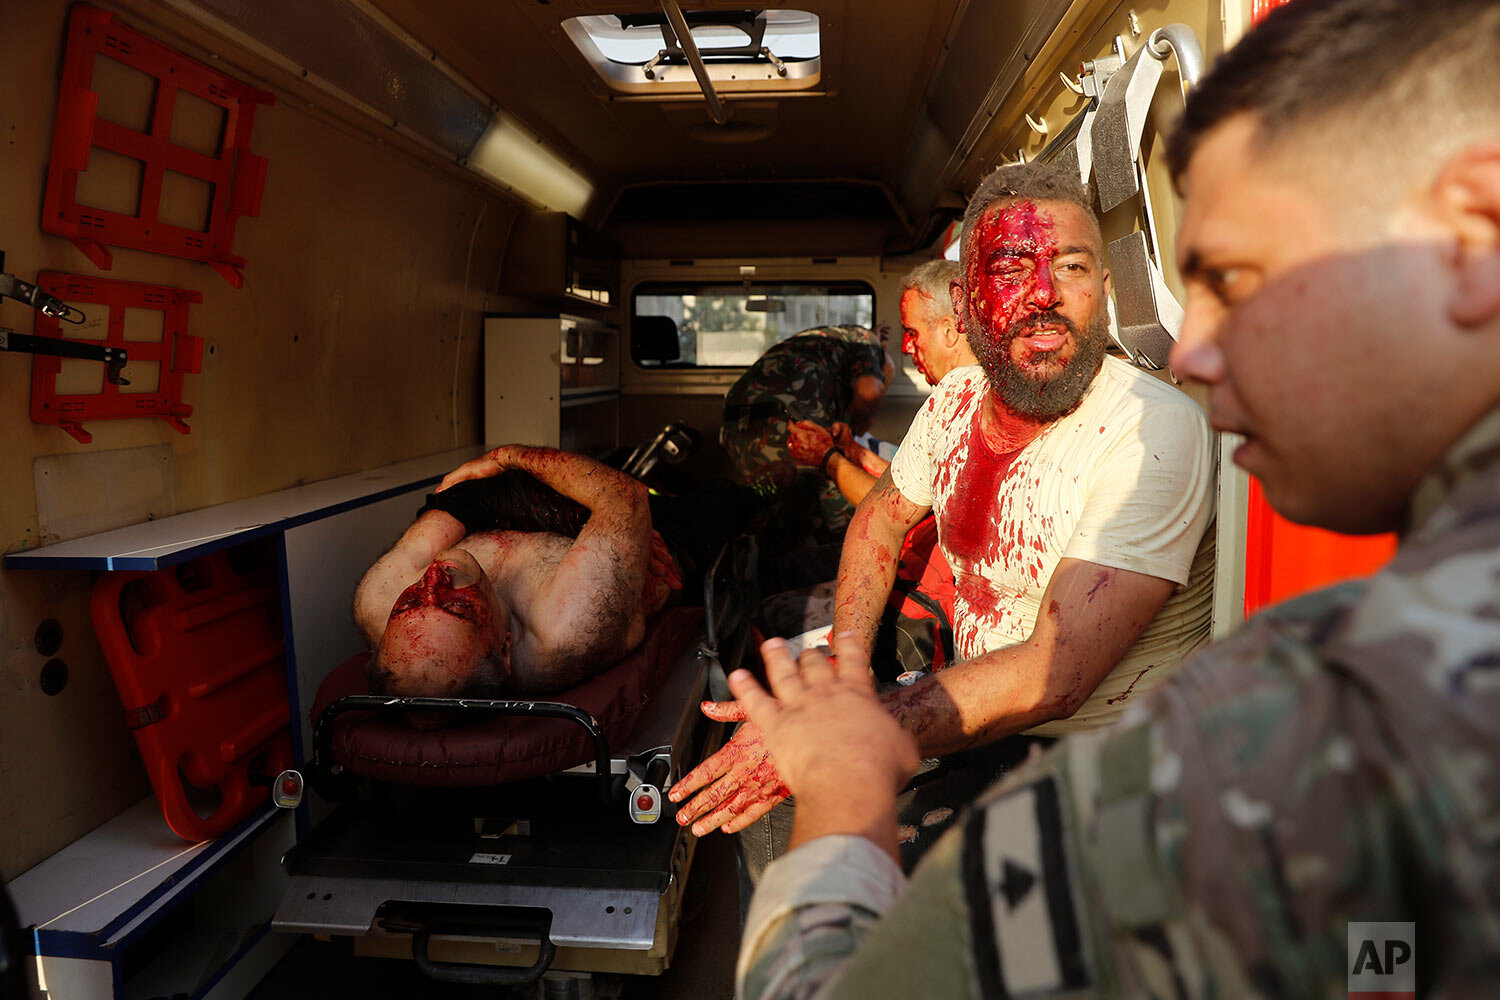  A Lebanese soldier, right, checks on injured men who sit inside an ambulance at the explosion scene that hit the seaport of Beirut, Lebanon, Tuesday, Aug. 4, 2020. (AP Photo/Hussein Malla) 